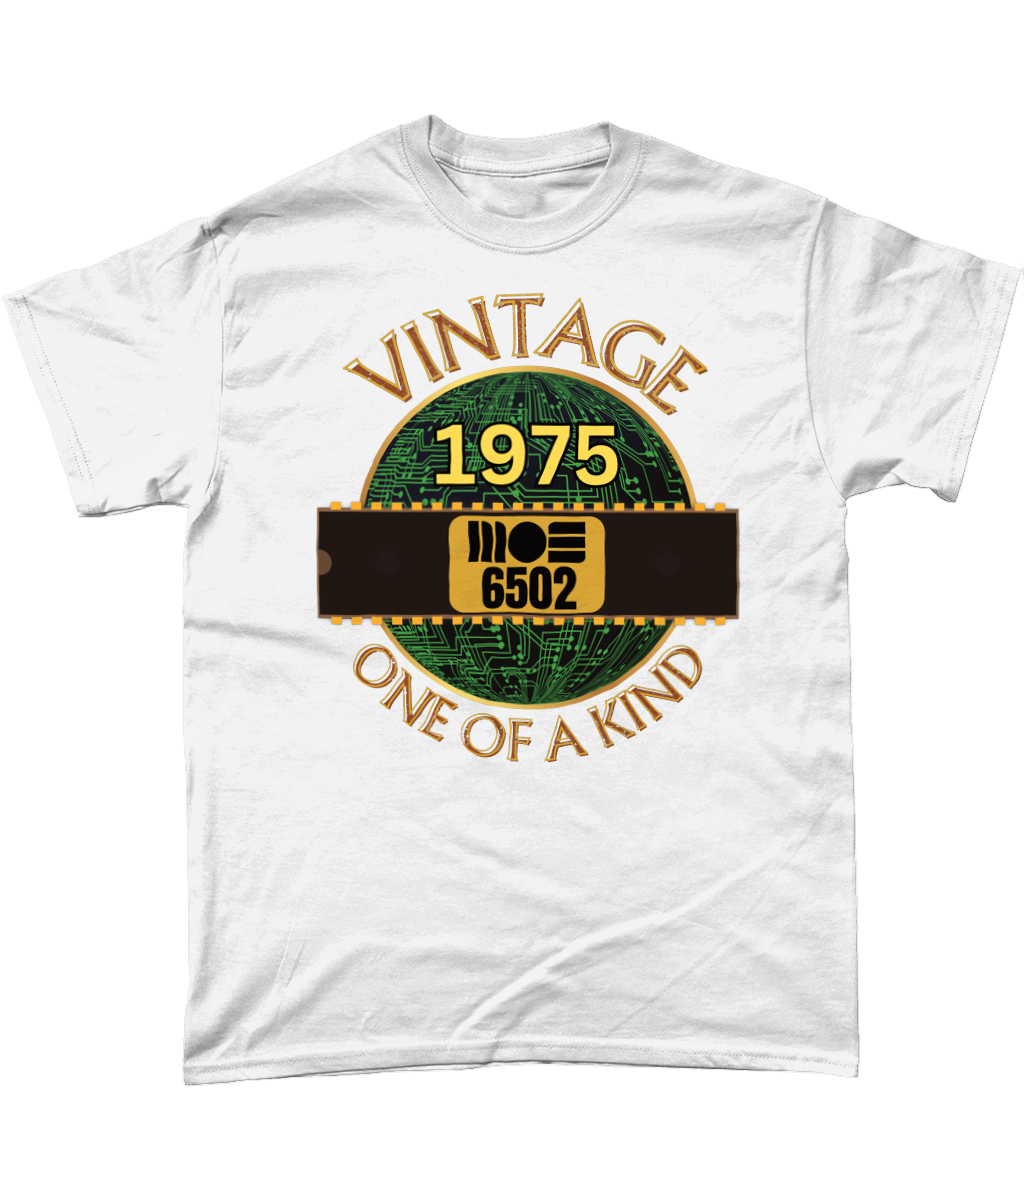 White T-shirt with a gold circle with a basic representation of a circuit board in green and a 40 pin chip across the front with MOS 6502 and 1975 written on it. Vintage one of a kind around the circle